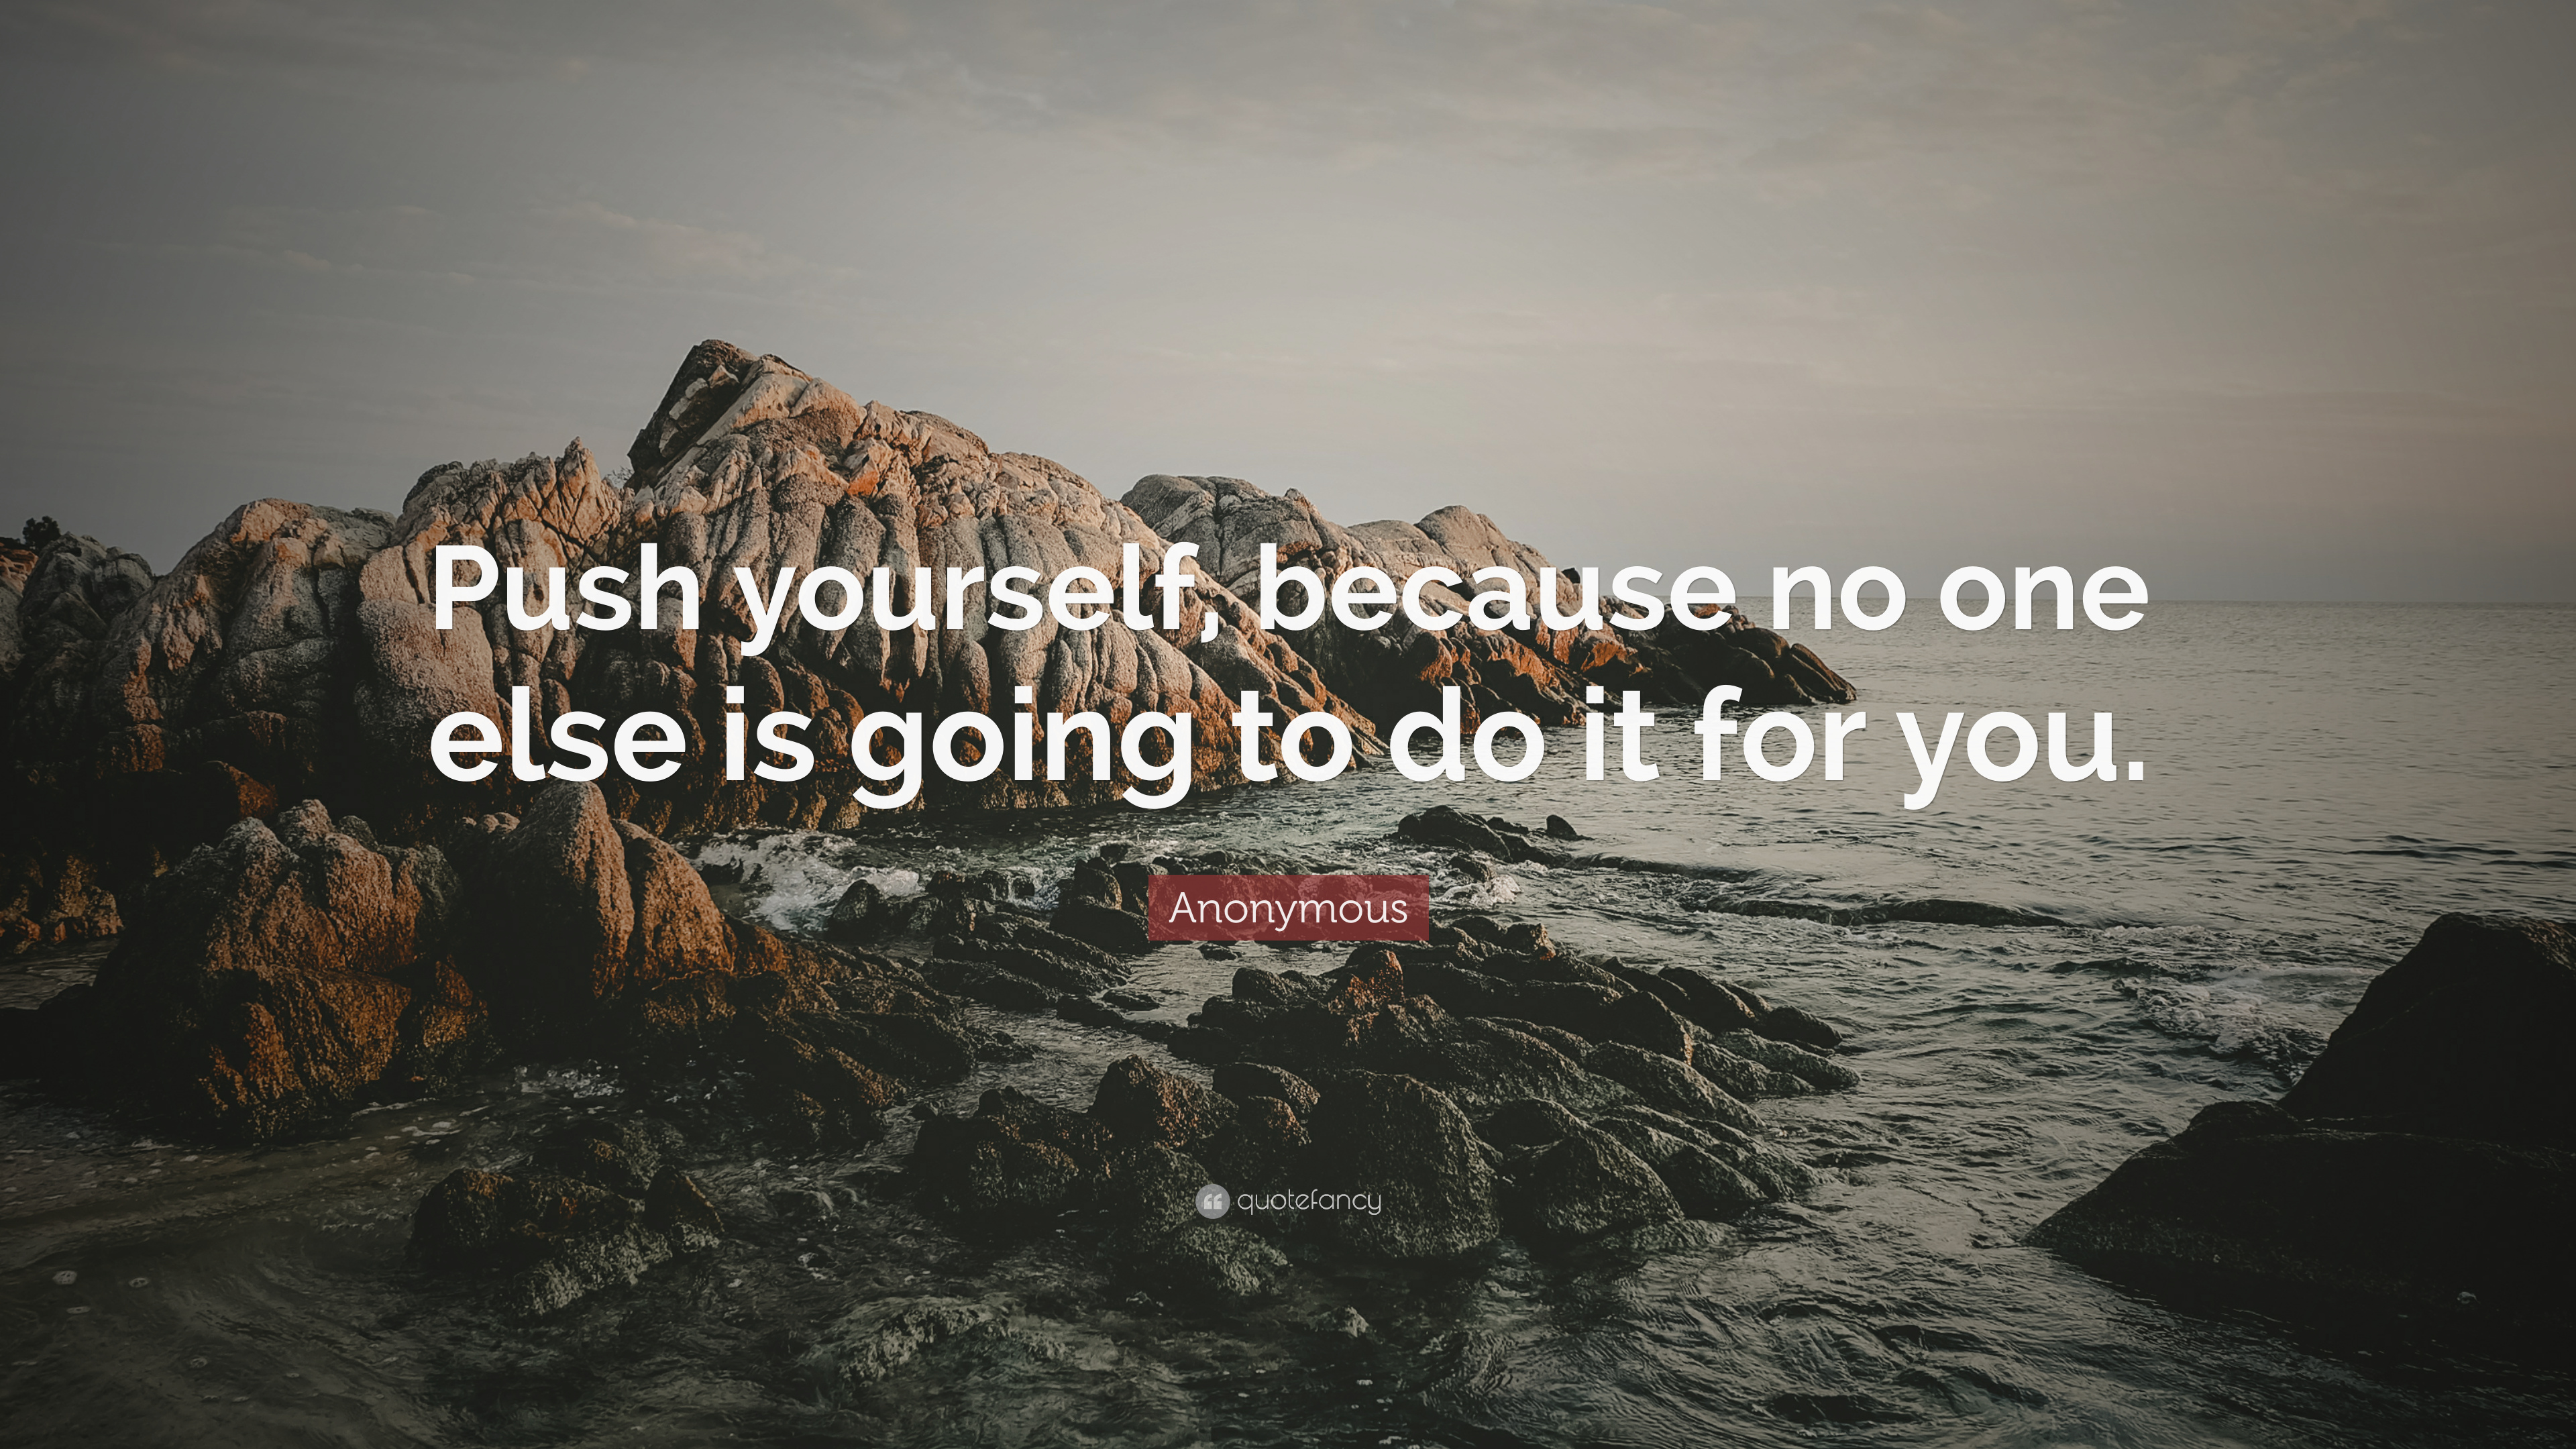 Anonymous Quote: "Push yourself, because no one else is going to do it...